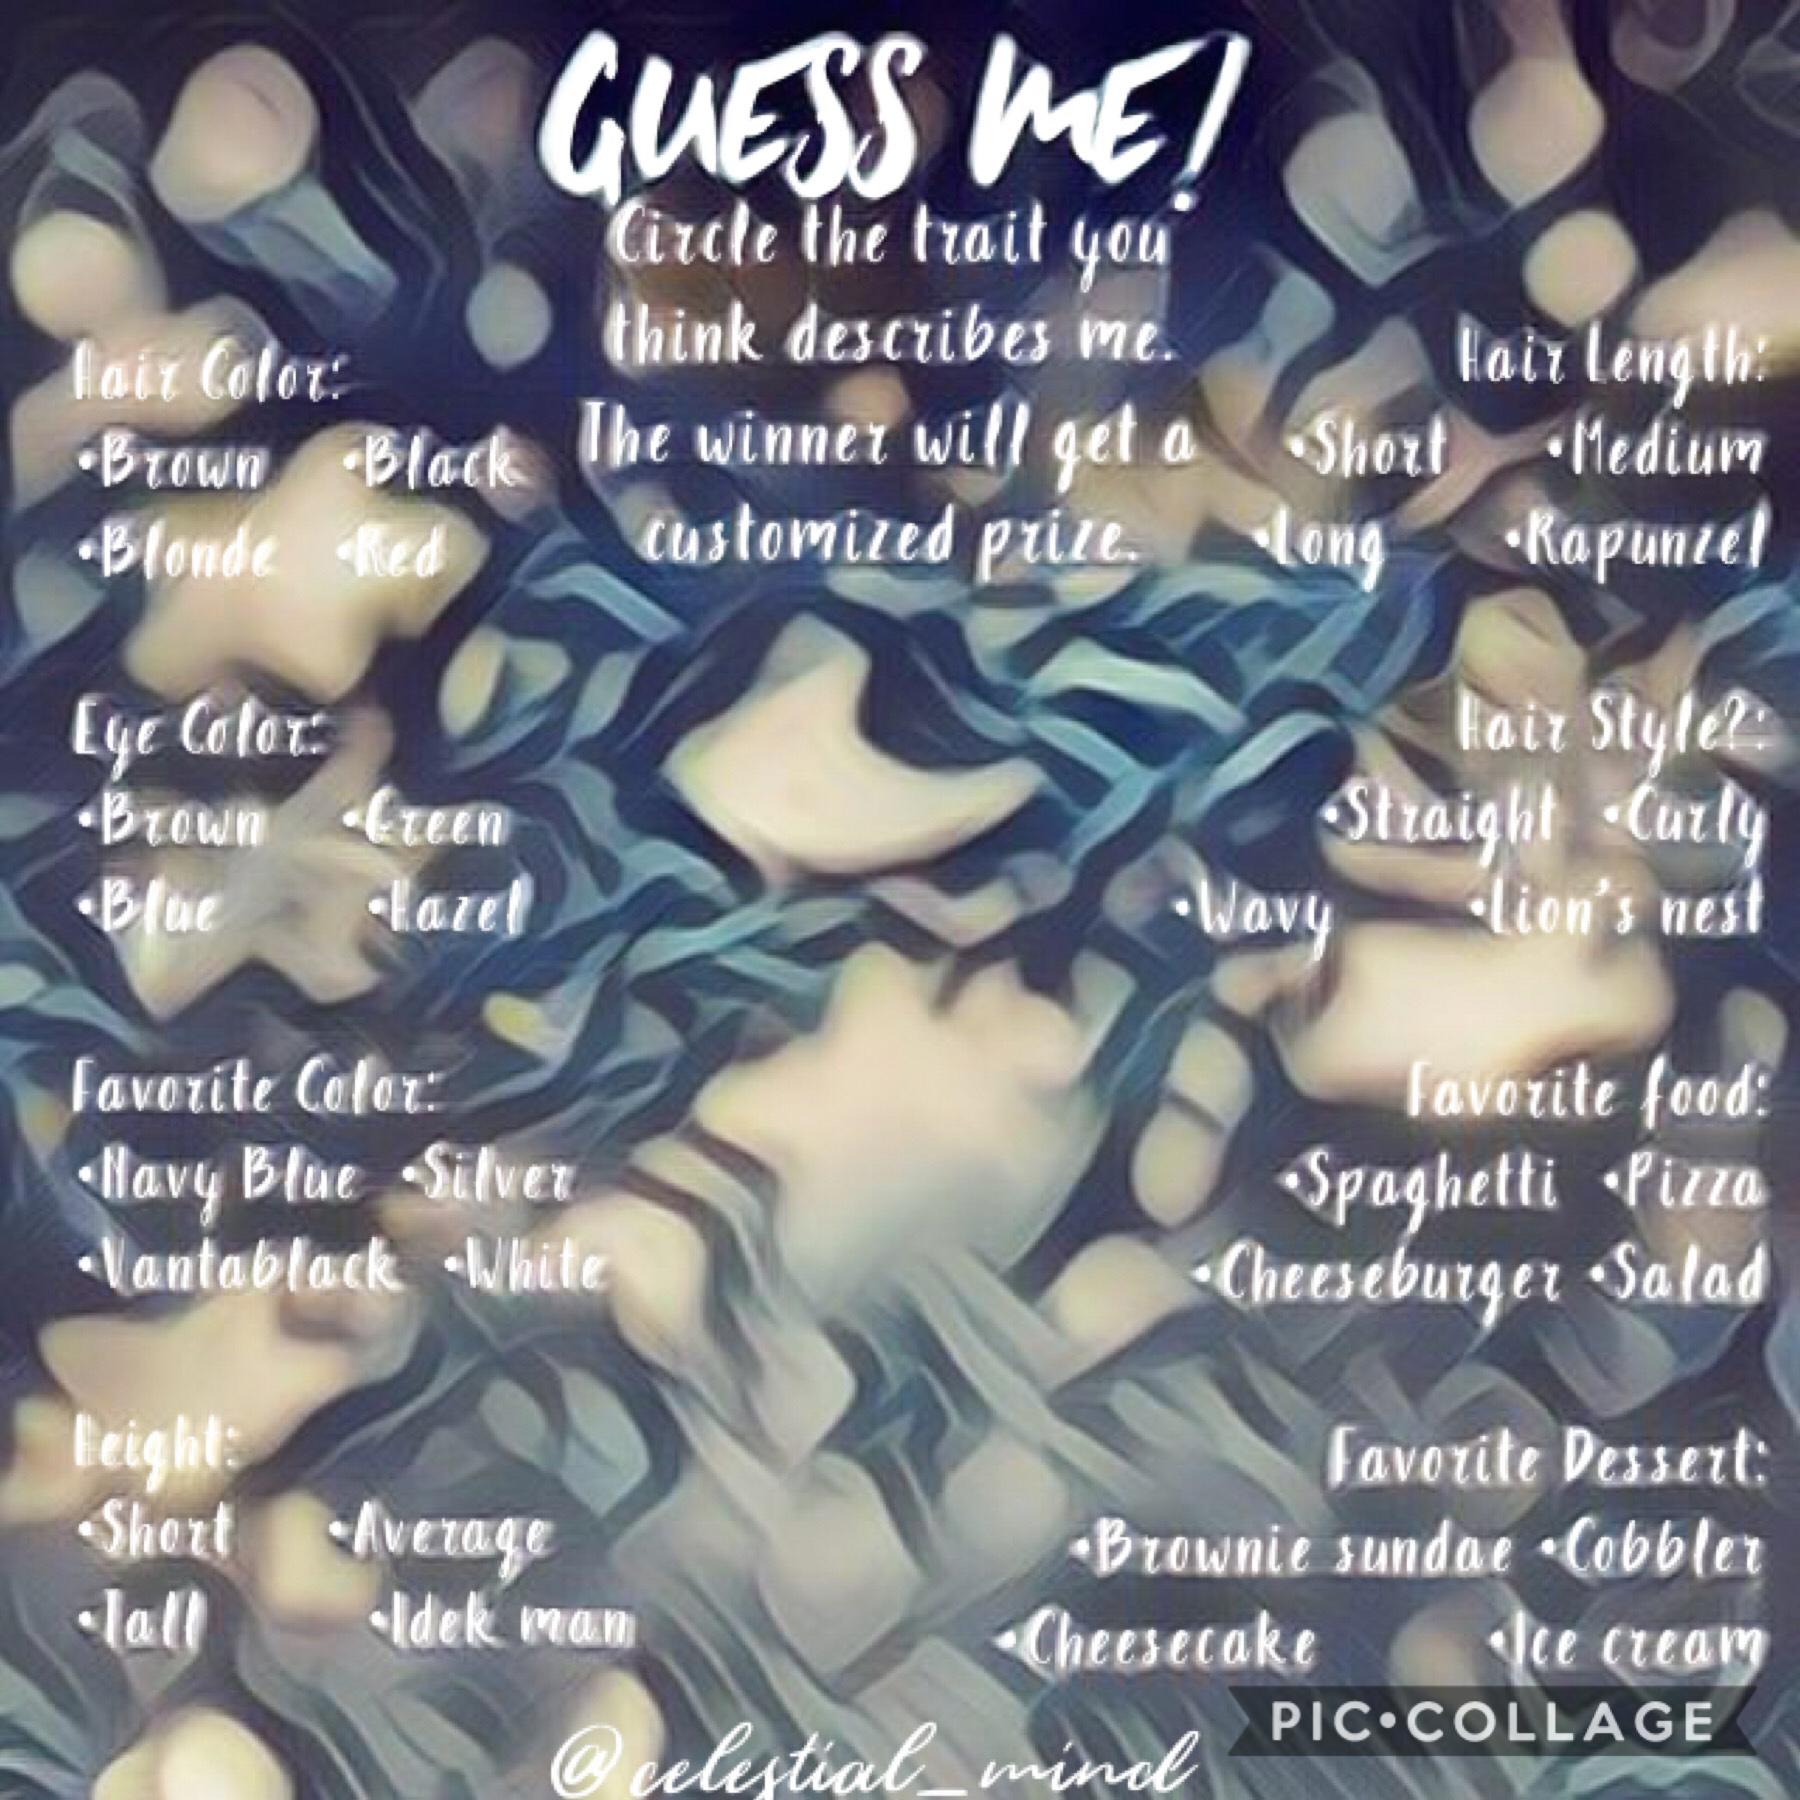 🖤💙Guess everything about me! Only one of these answers was given out to one person, so it’s basically pure luck!💙🖤